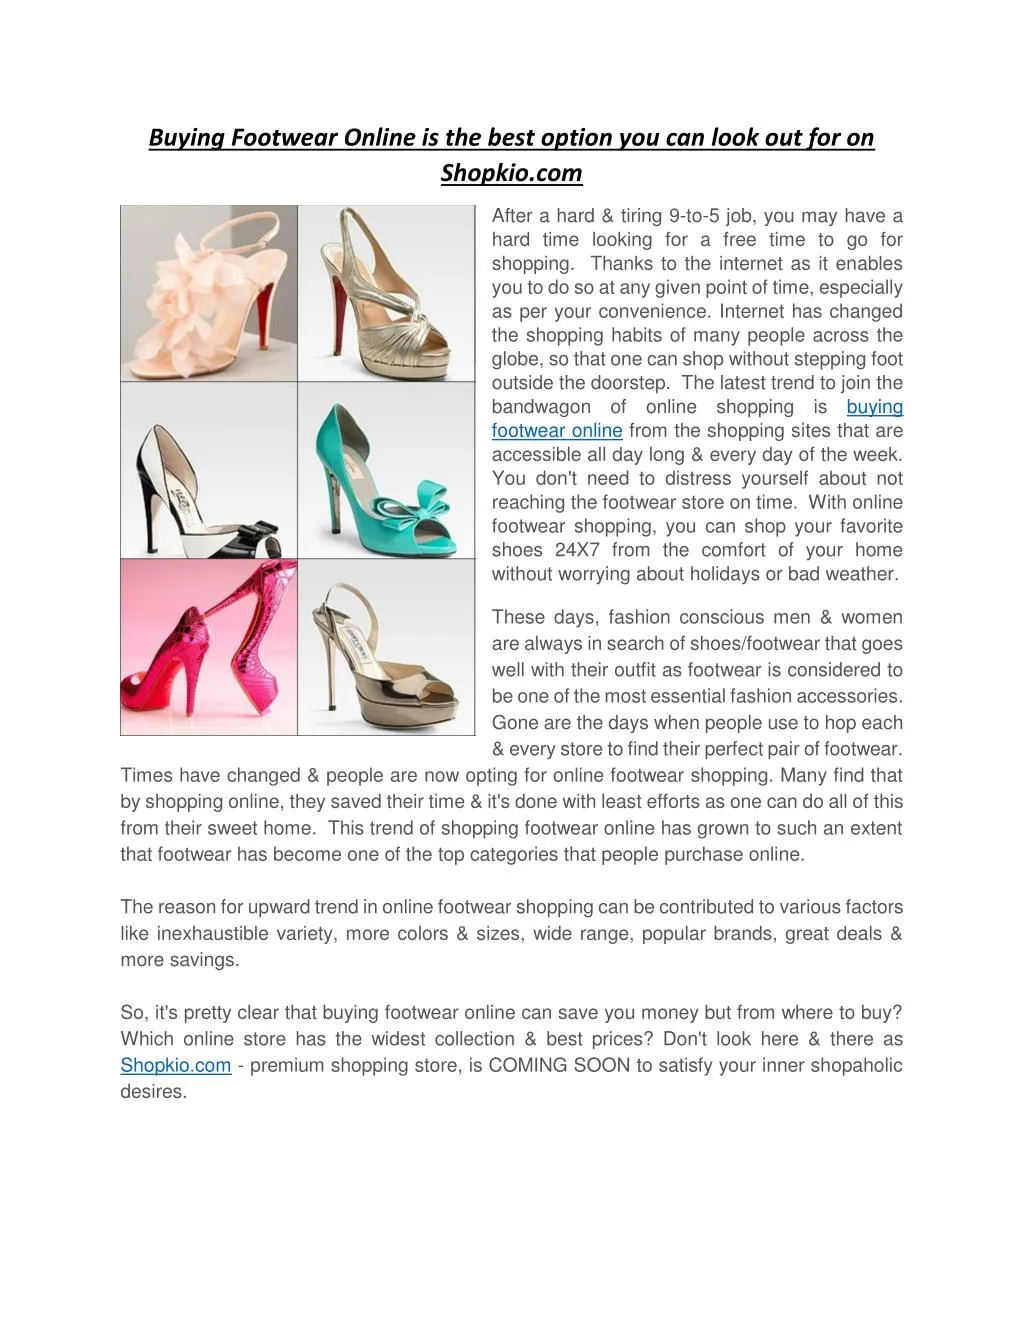 PPT - Buying Footwear Online: A new trend in Online Shopping PowerPoint ...